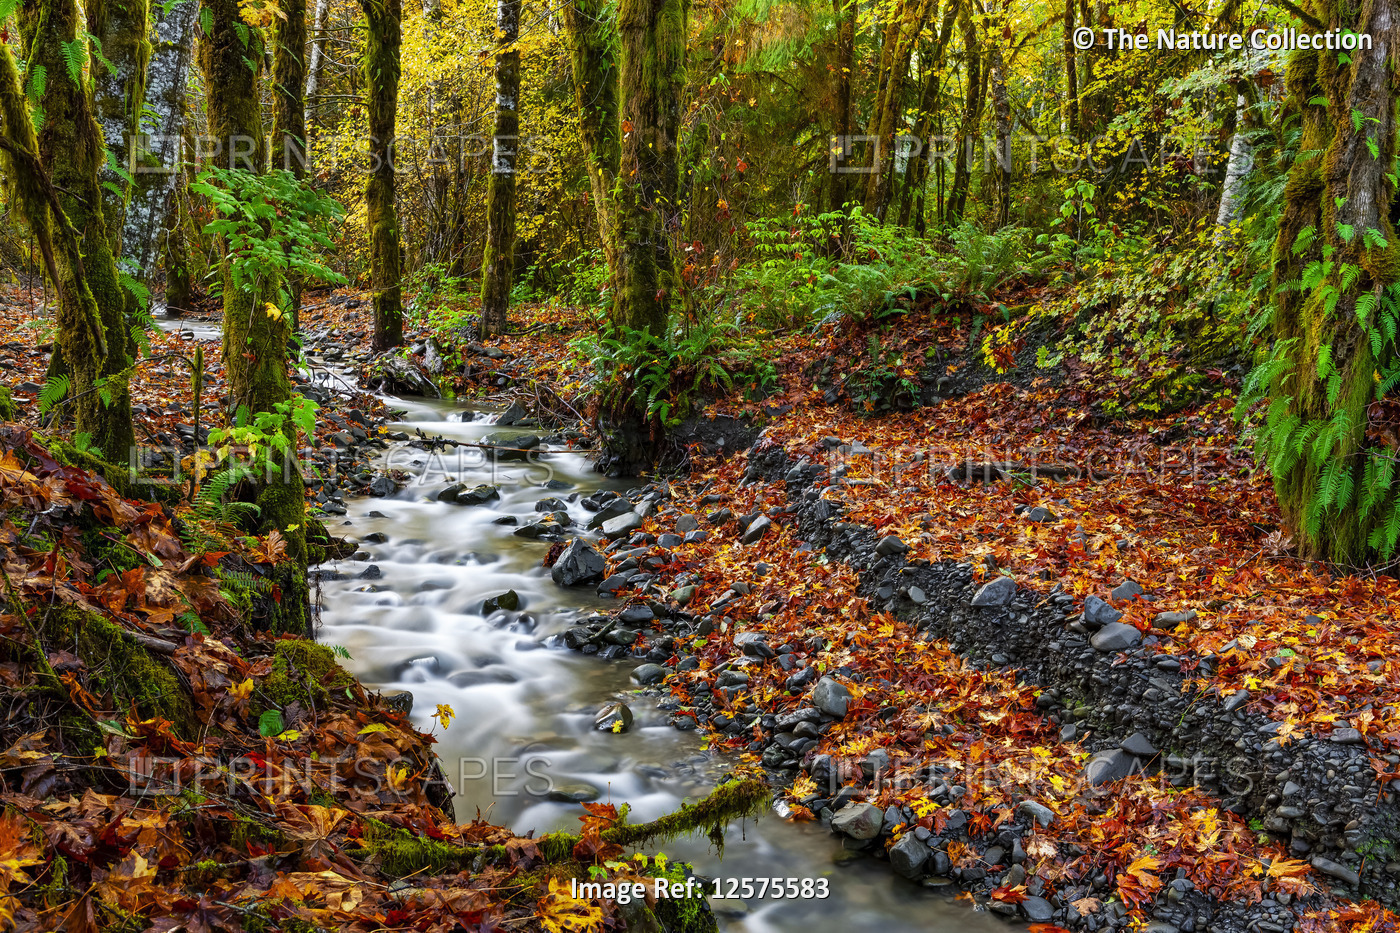 Creek flowing through a rainforest in autumn; Oregon, United States of America